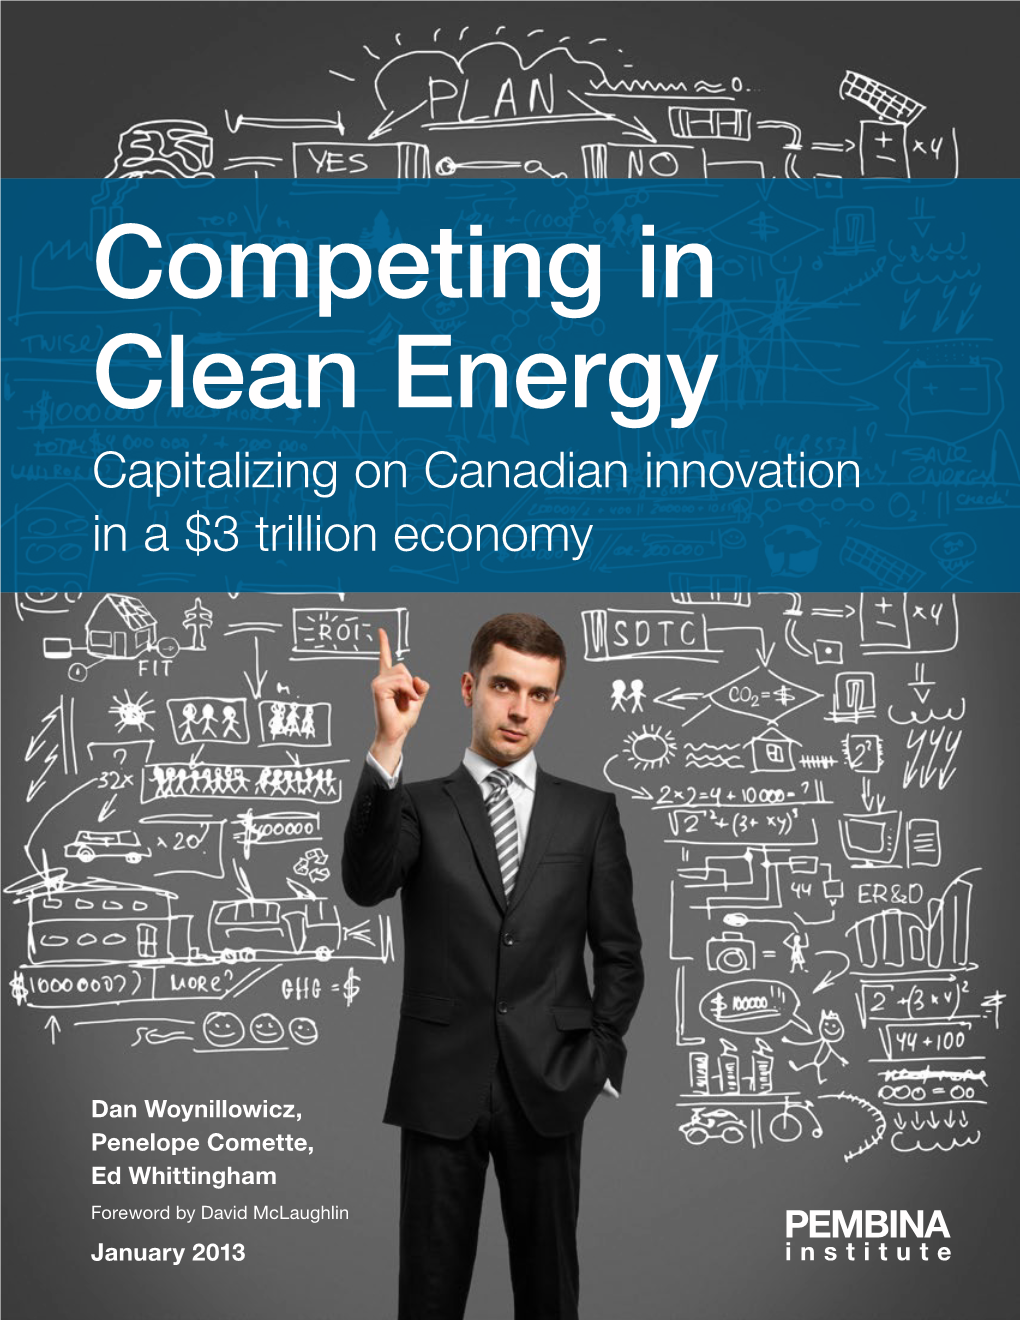 Competing in Clean Energy Capitalizing on Canadian Innovation in a $3 Trillion Economy